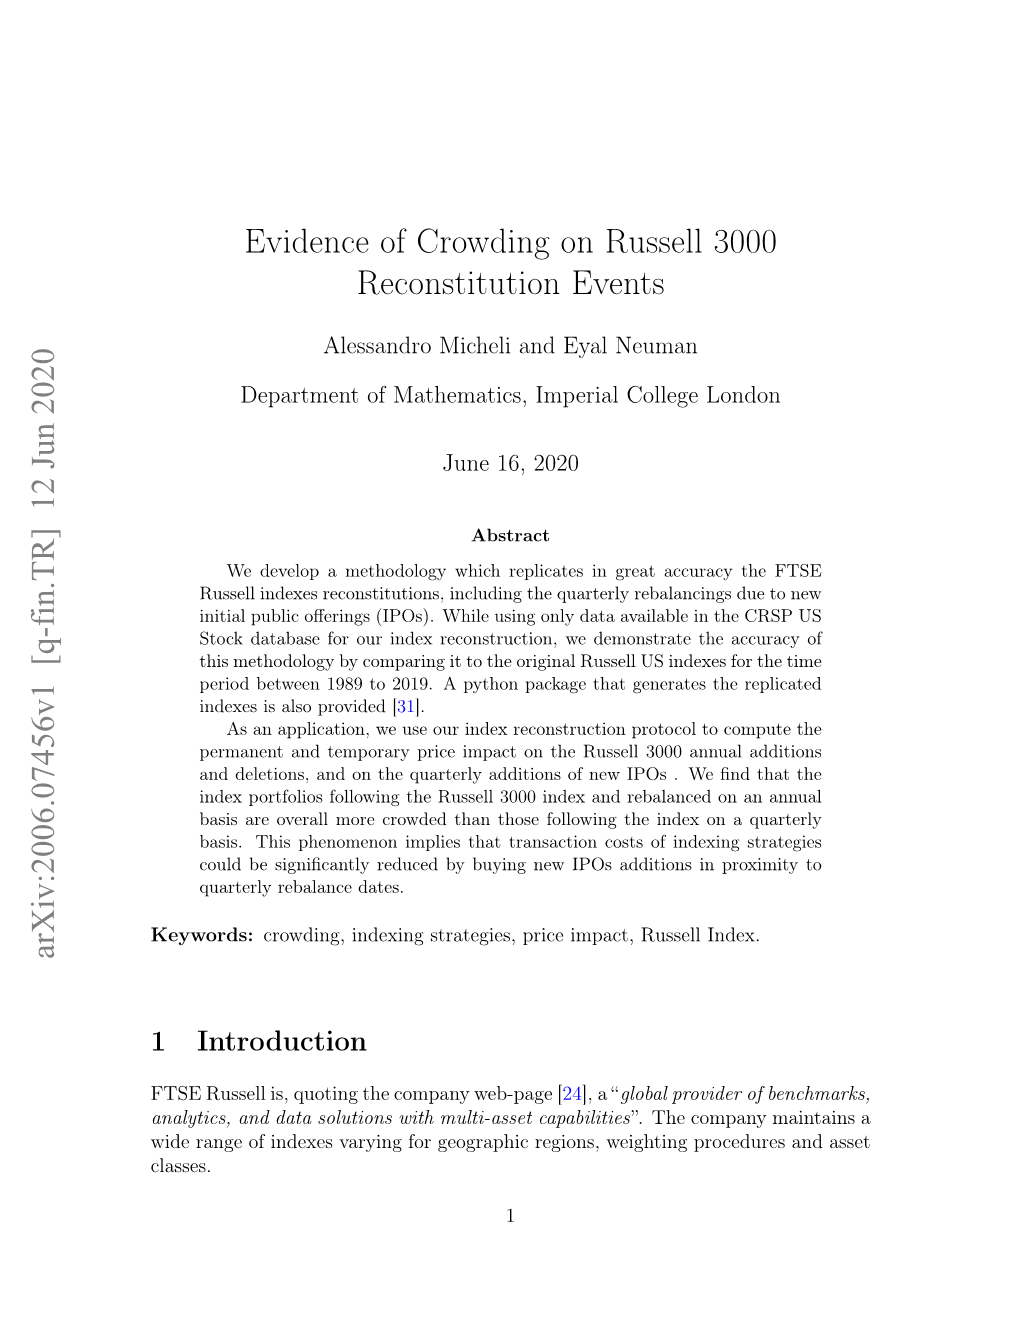 Evidence of Crowding on Russell 3000 Reconstitution Events